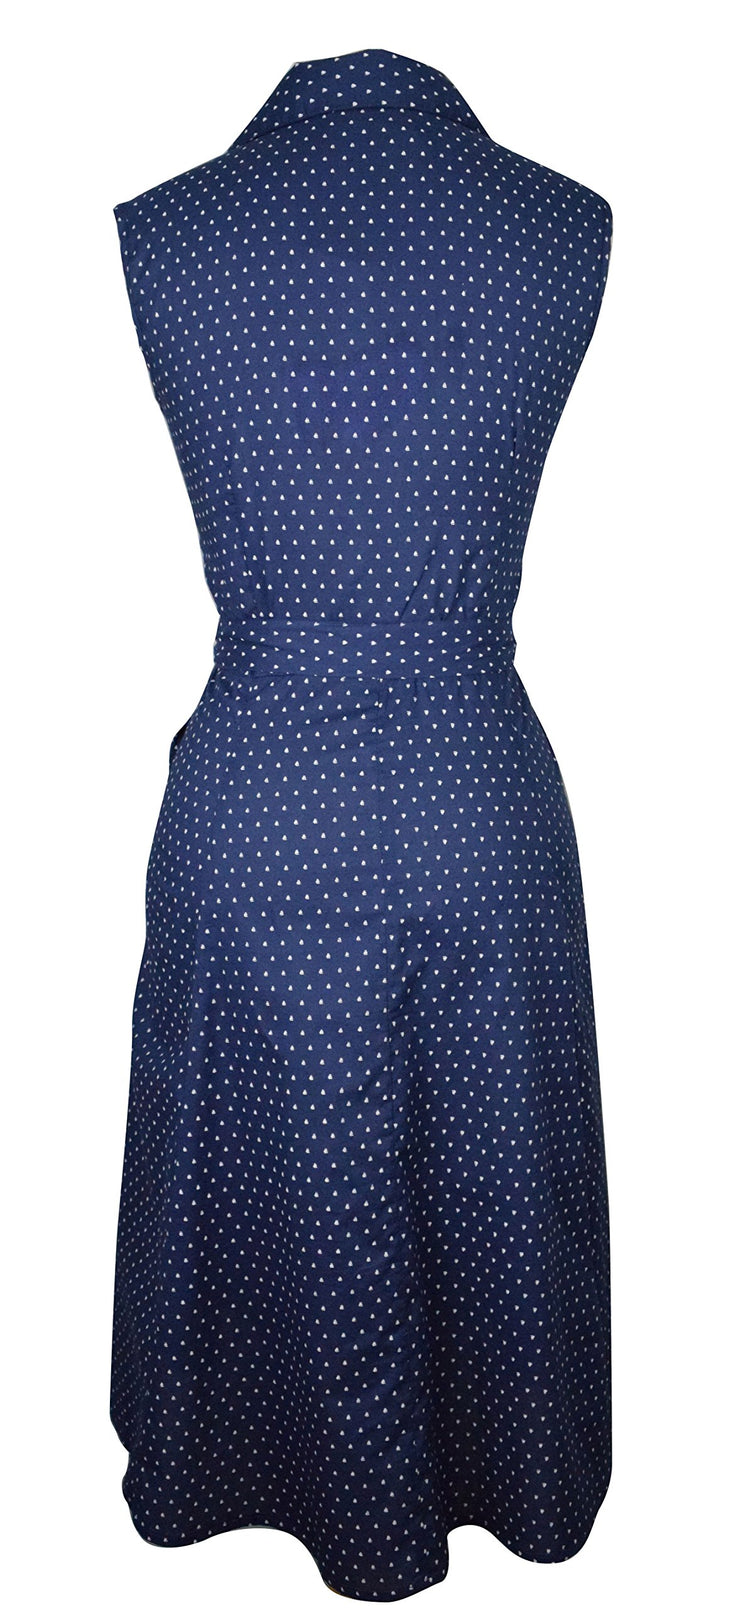 Peach Couture Navy Polka Dot Vintage Retro Button Up Party Dress with Belt